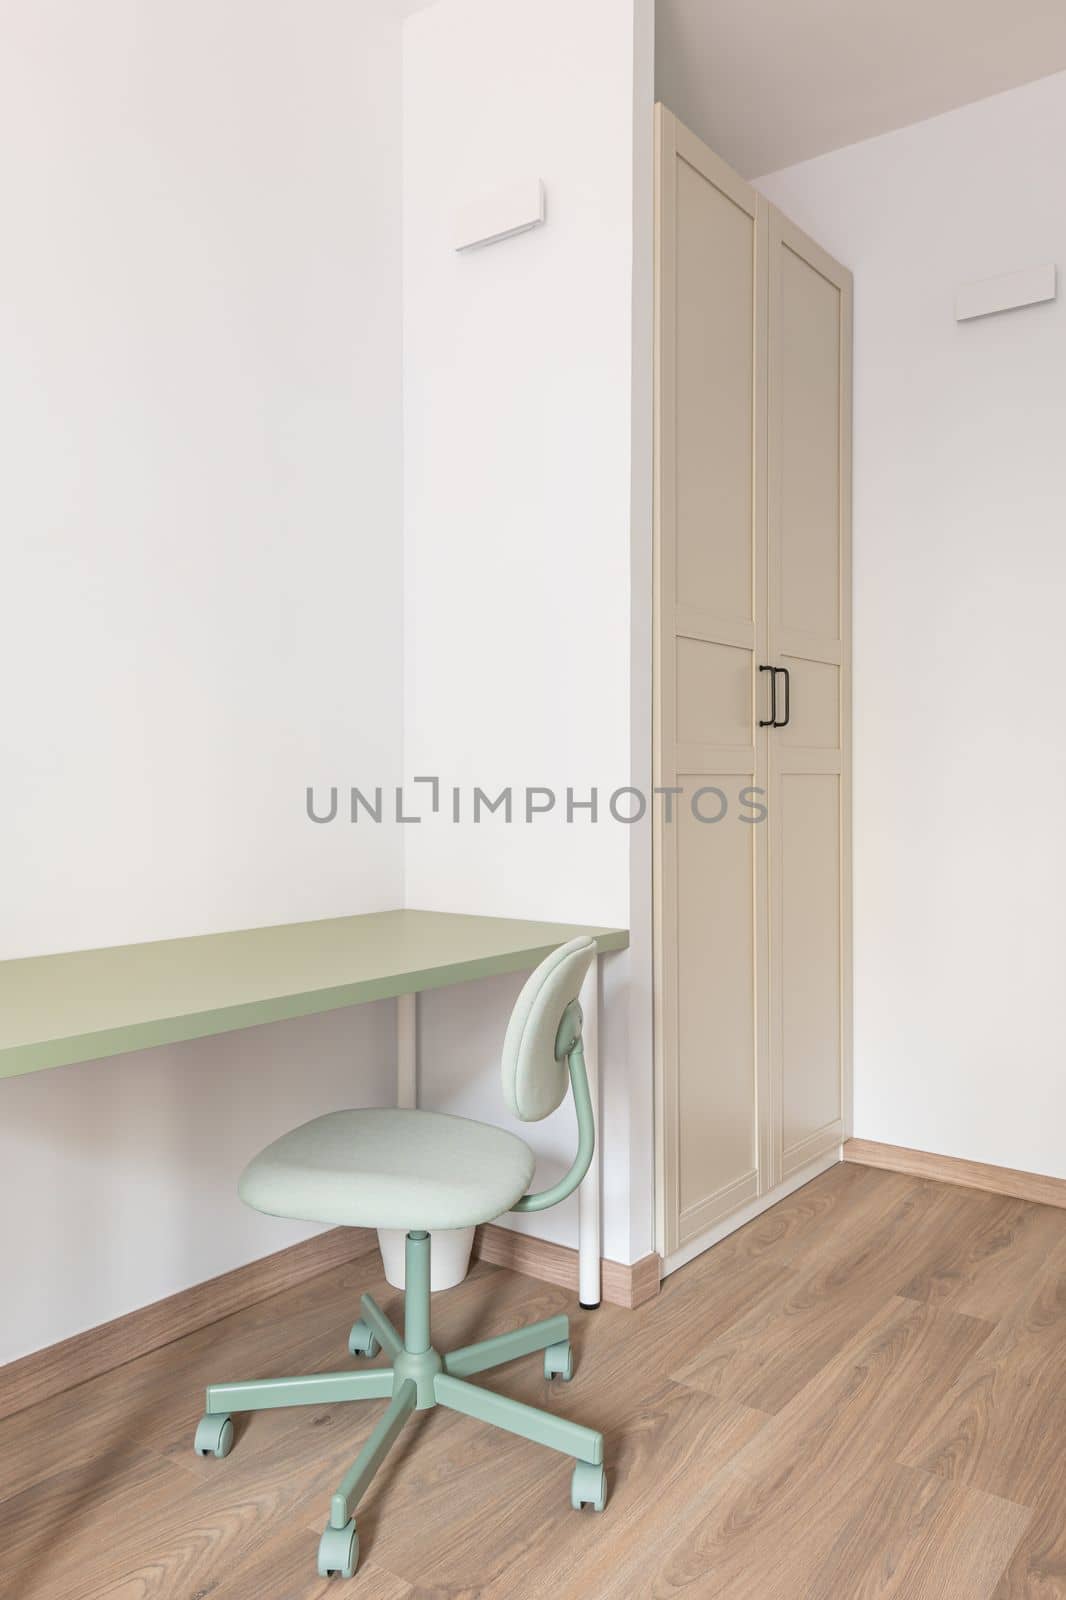 Part of the living room with white walls, built-in wardrobe, wood-effect parquet flooring. Against the wall is a work table with a mint-colored top and a mint-colored leather chair